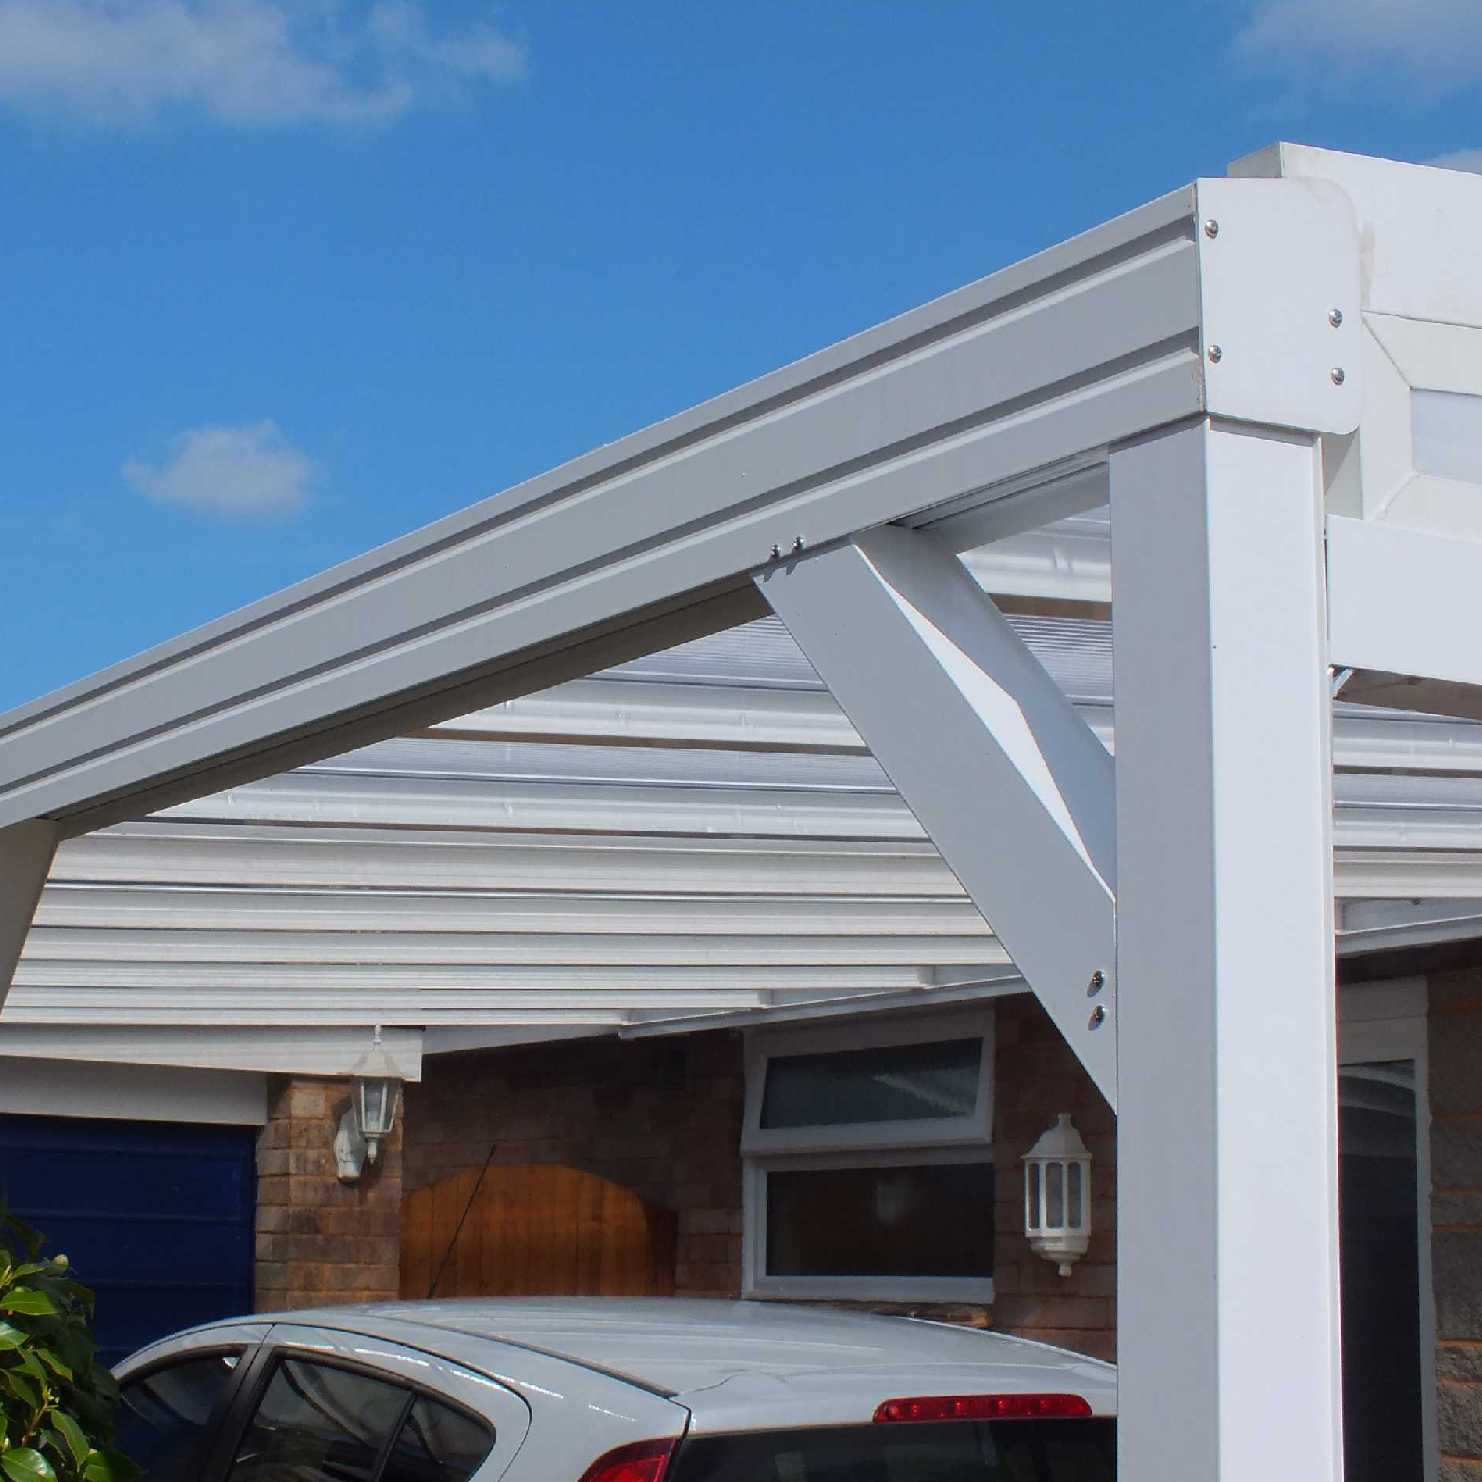 Buy Omega Smart Lean-To Canopy, White with 16mm Polycarbonate Glazing - 3.1m (W) x 4.5m (P), (2) Supporting Posts online today